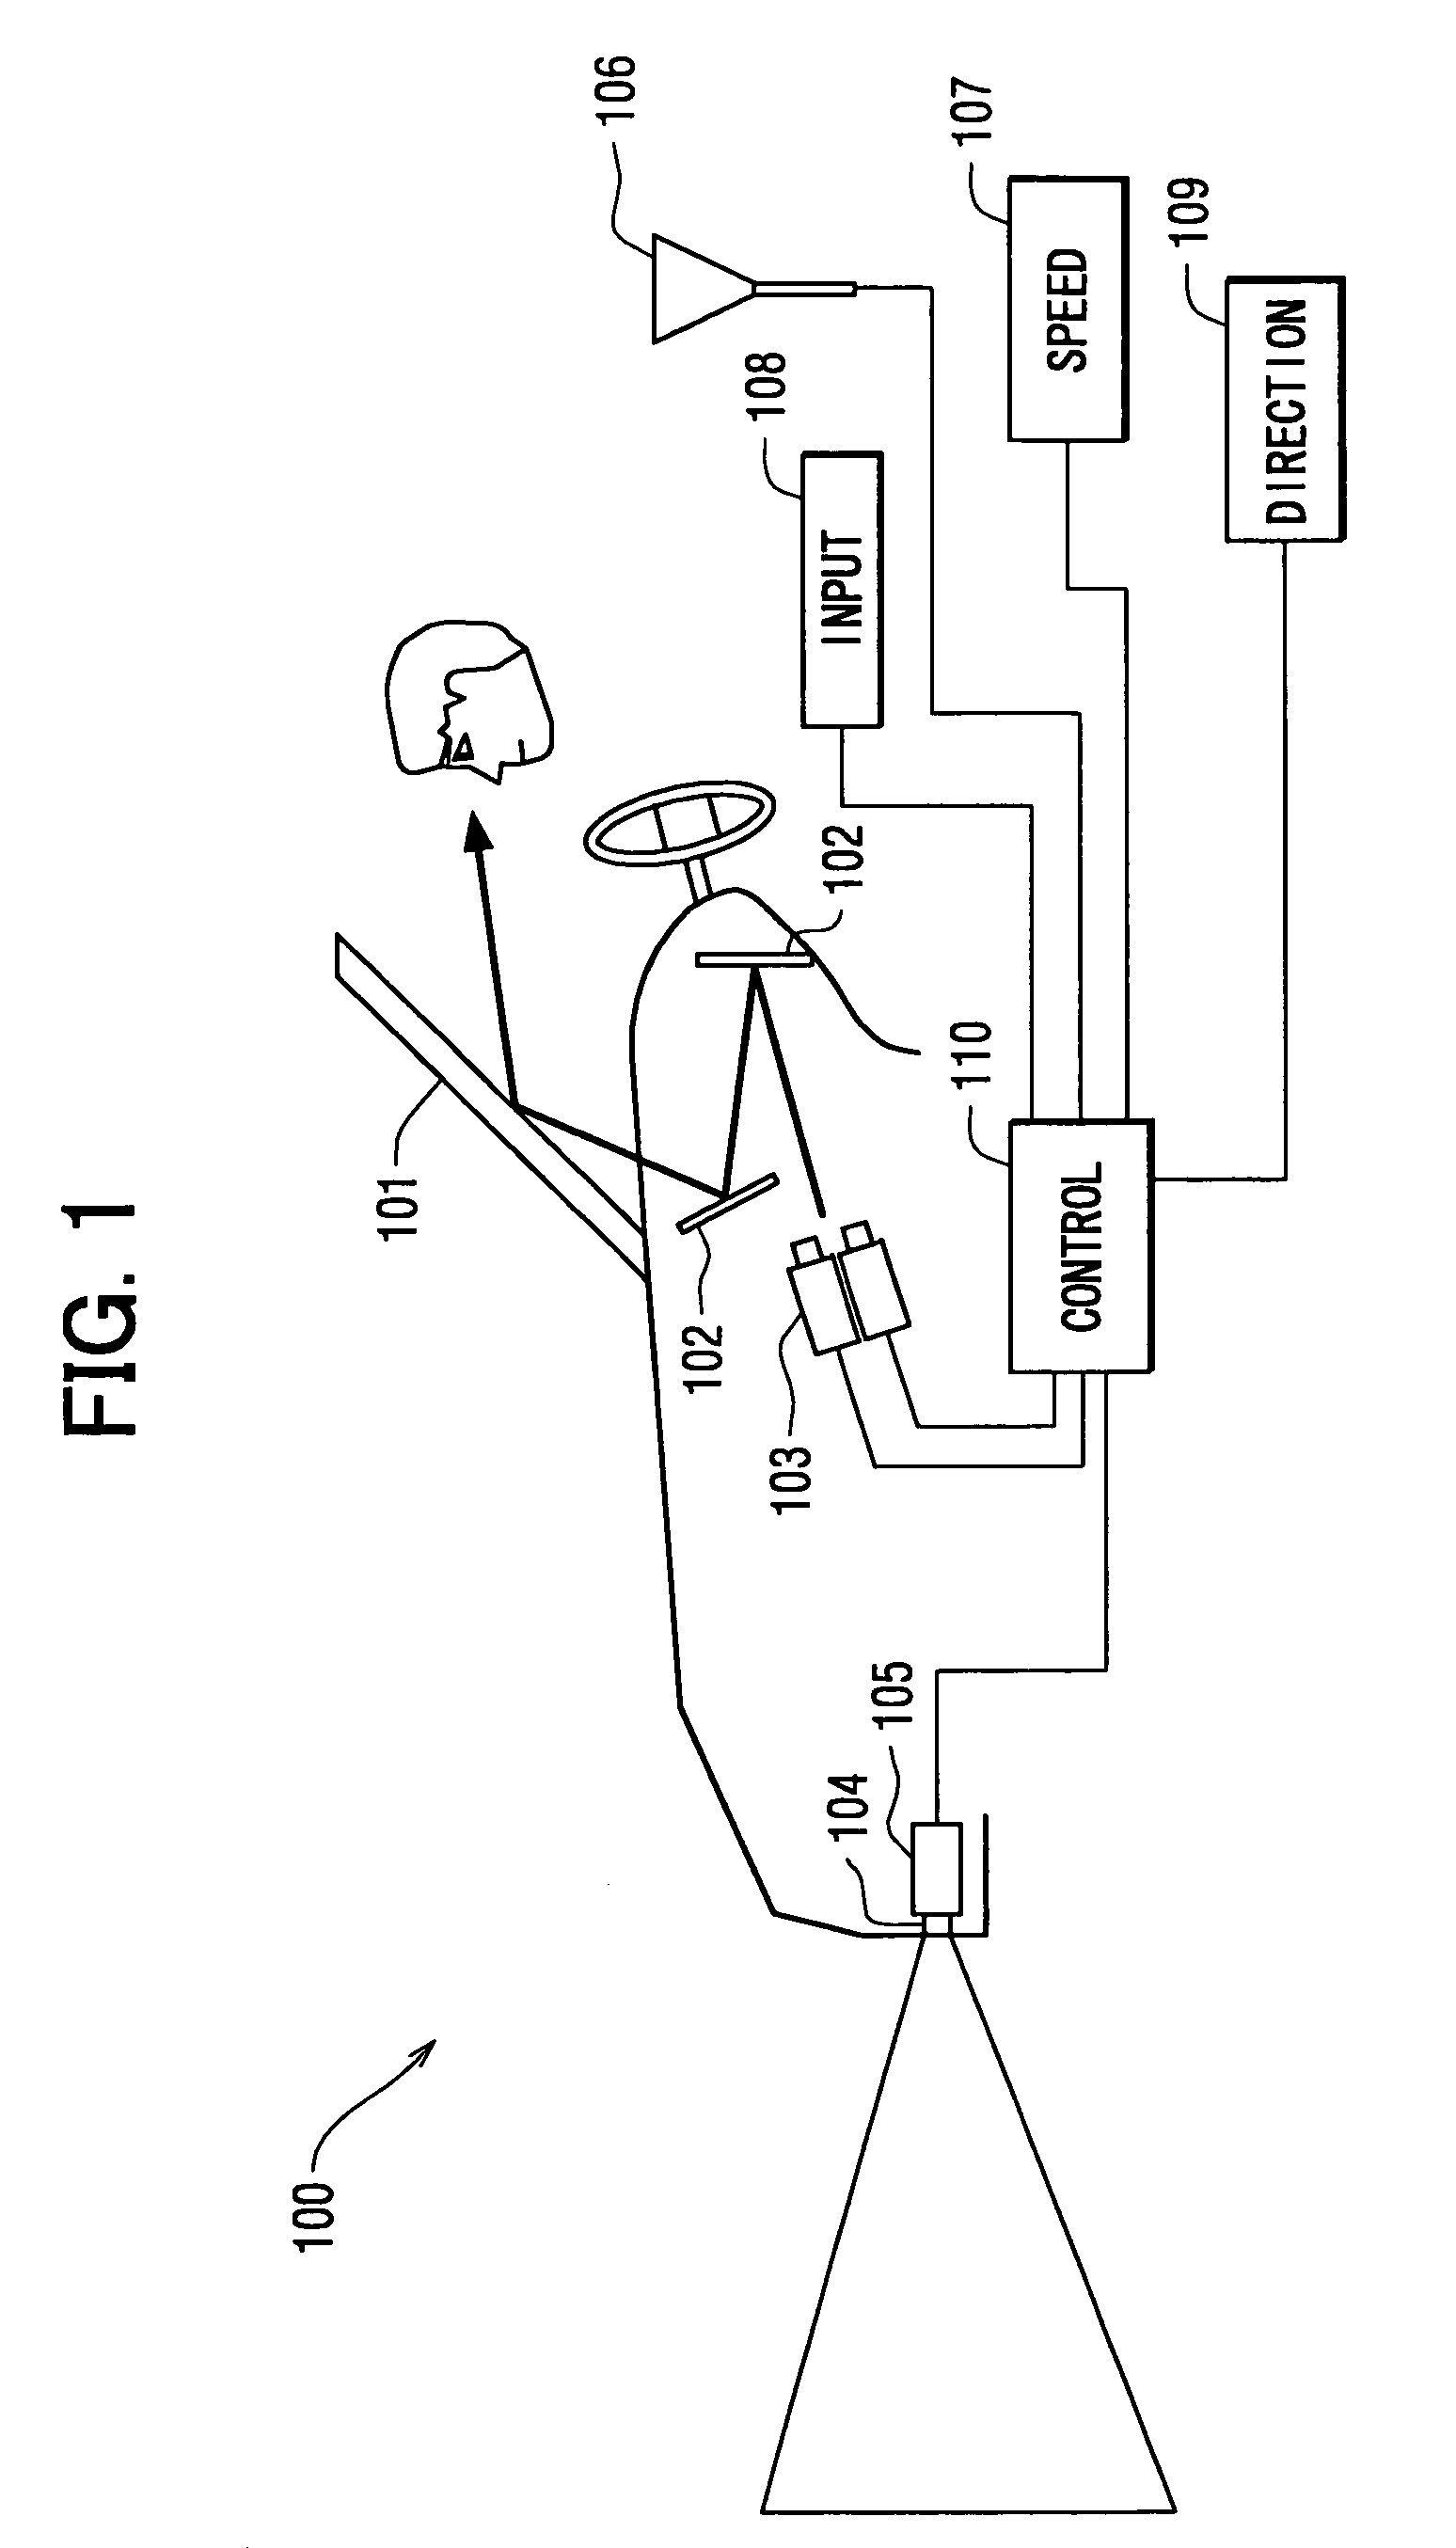 Display method and apparatus for changing display position based on external environment